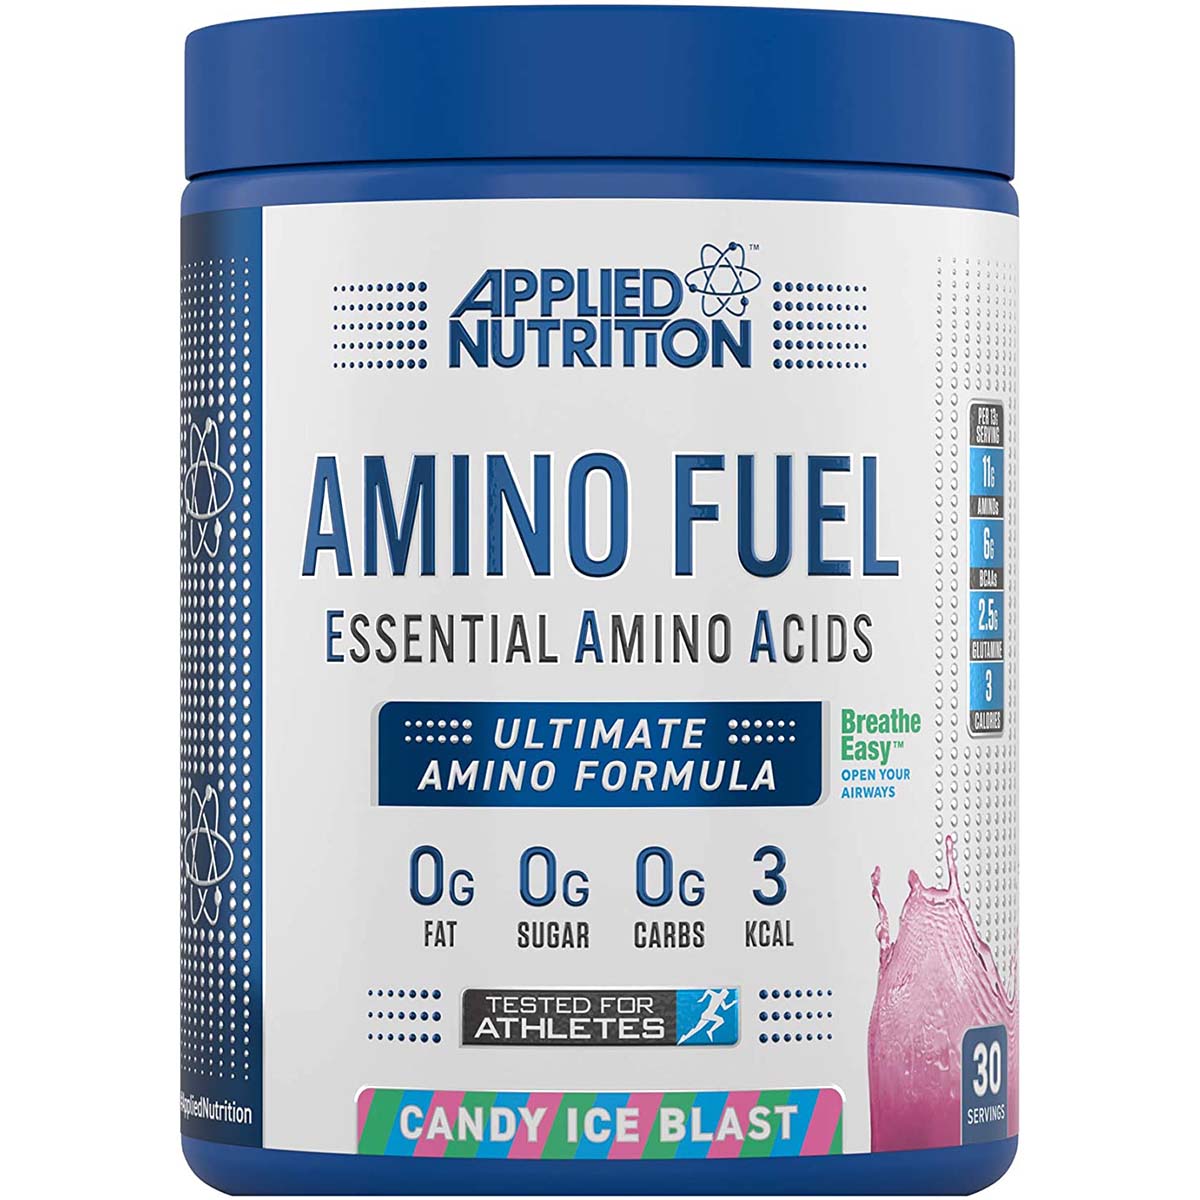 Applied Nutrition Amino Fuel EAA 30 Candy Ice Blast